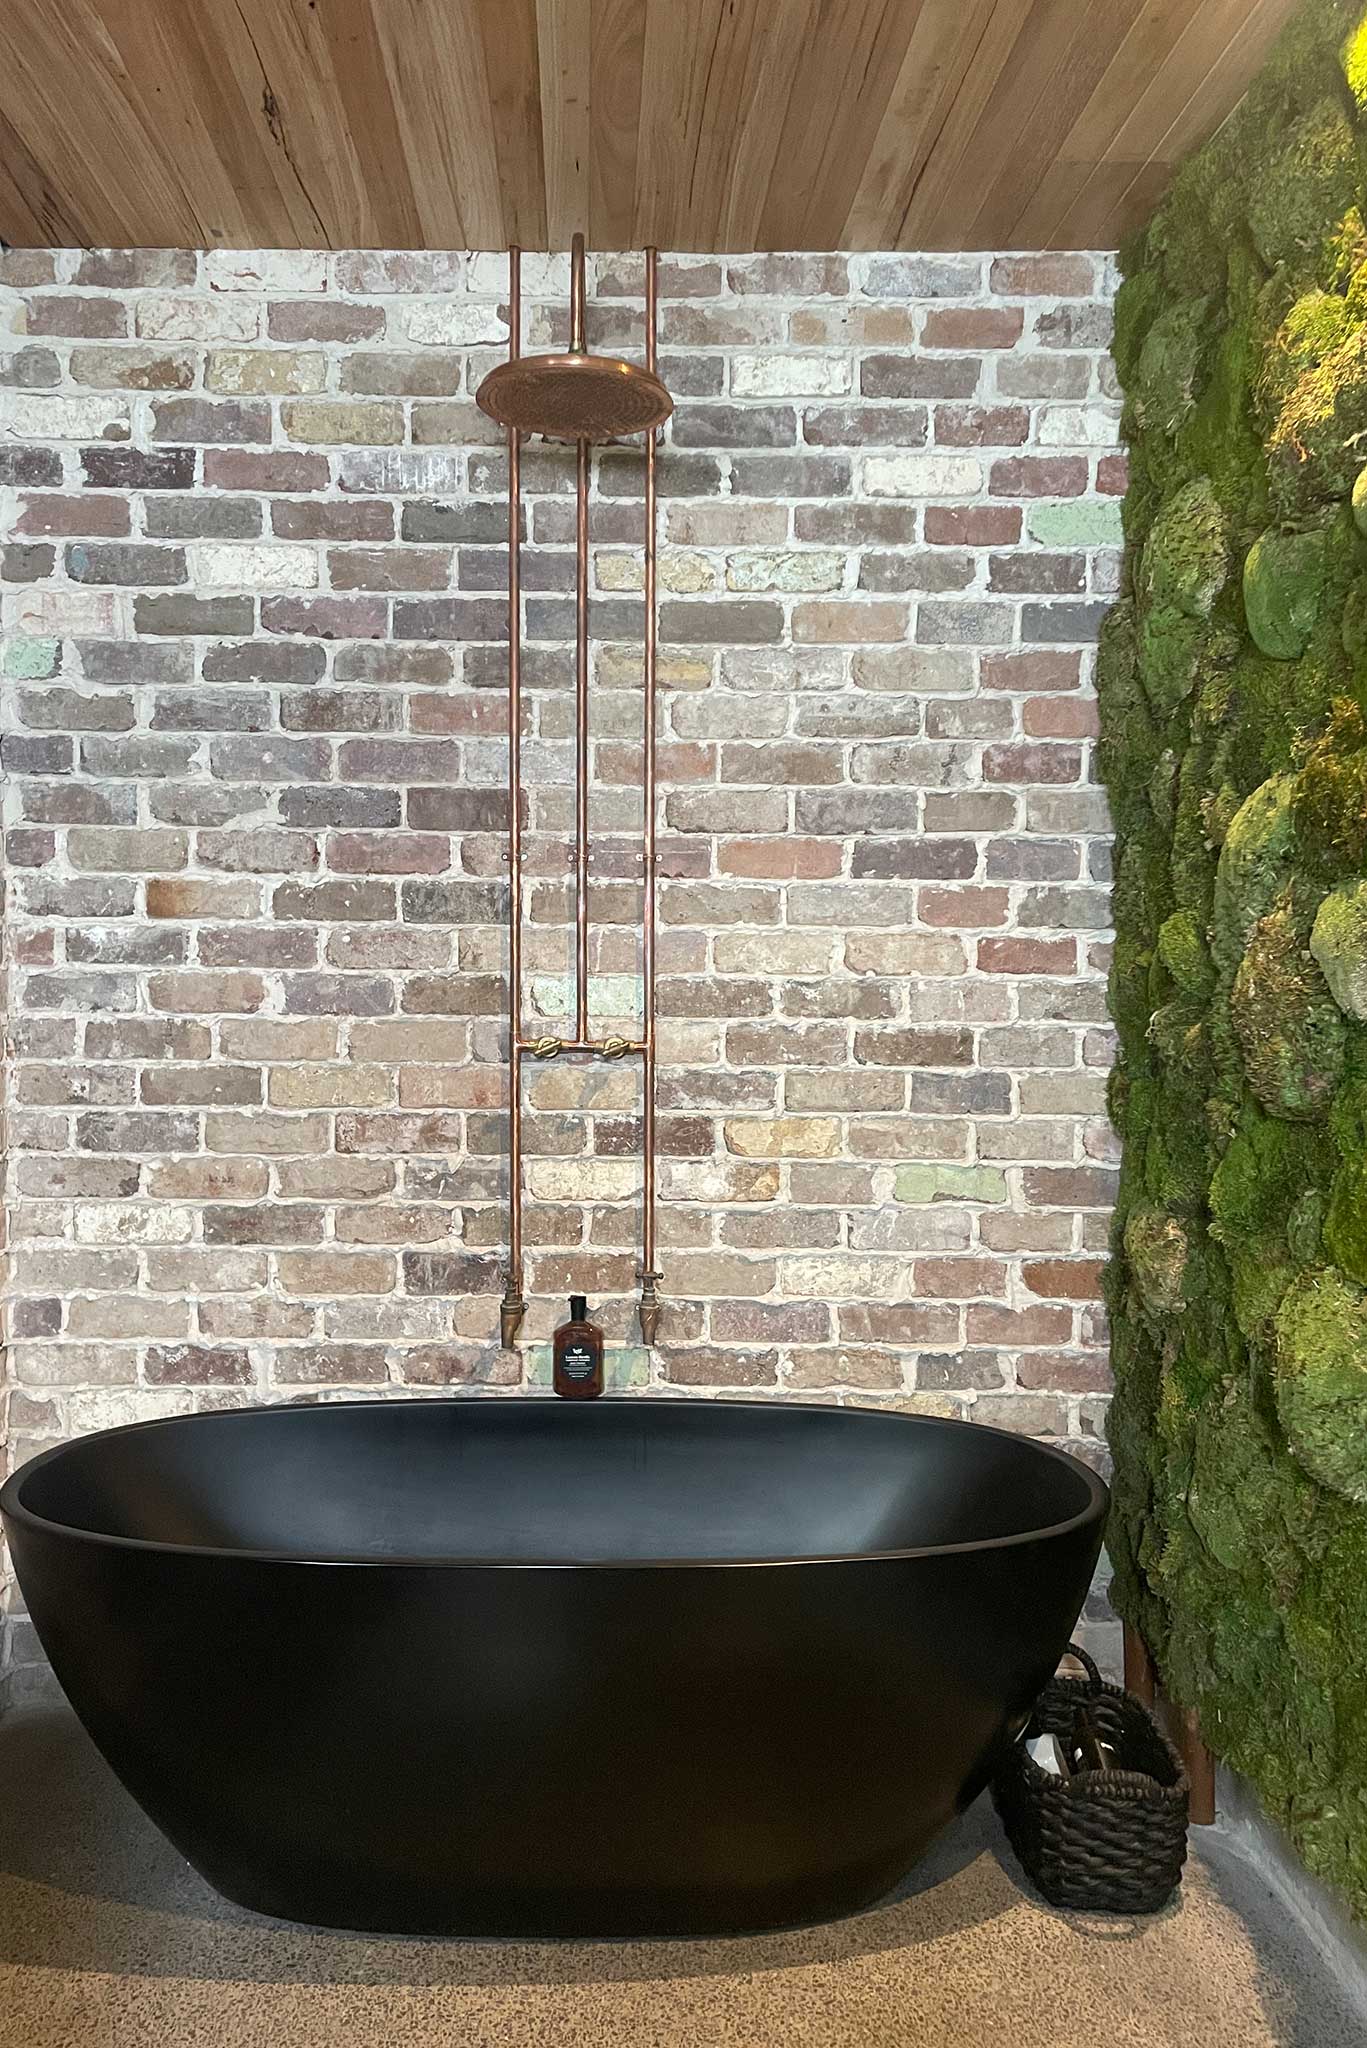 Interior Fitout + Moss Wall Central Coast - Project "Moss Wash" - Moss wall, exposed brick wall and freestanding black bath tub with copper piping